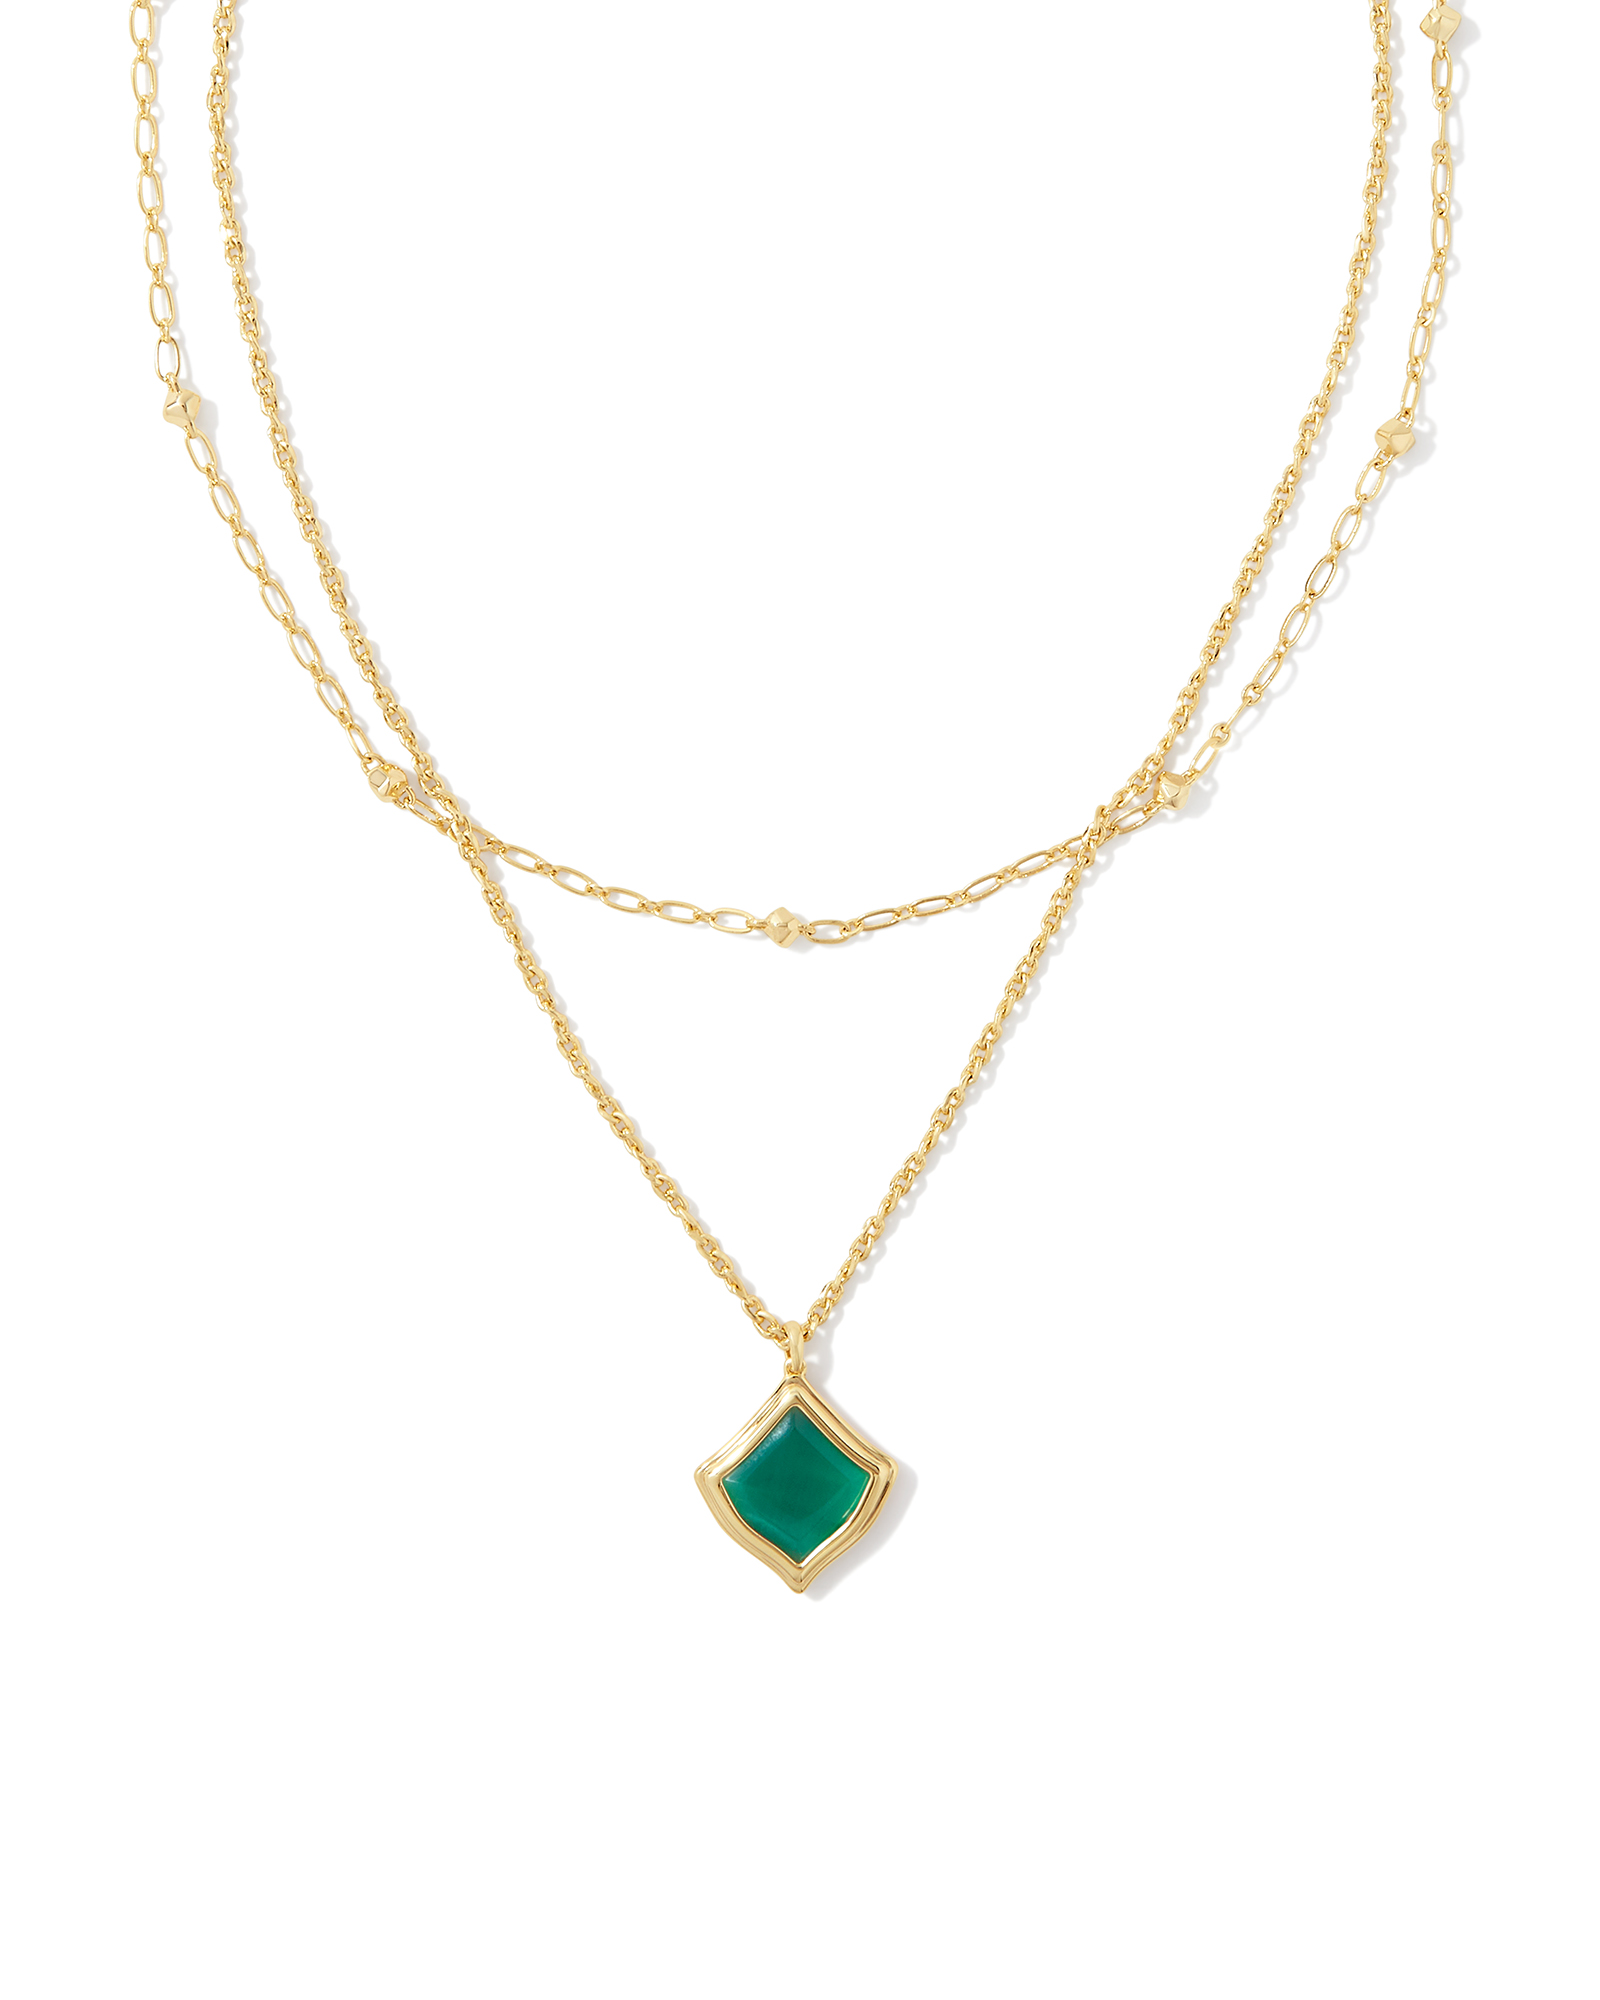 Cailin Gold Pendant Necklace in Green Crystal | Kendra Scott